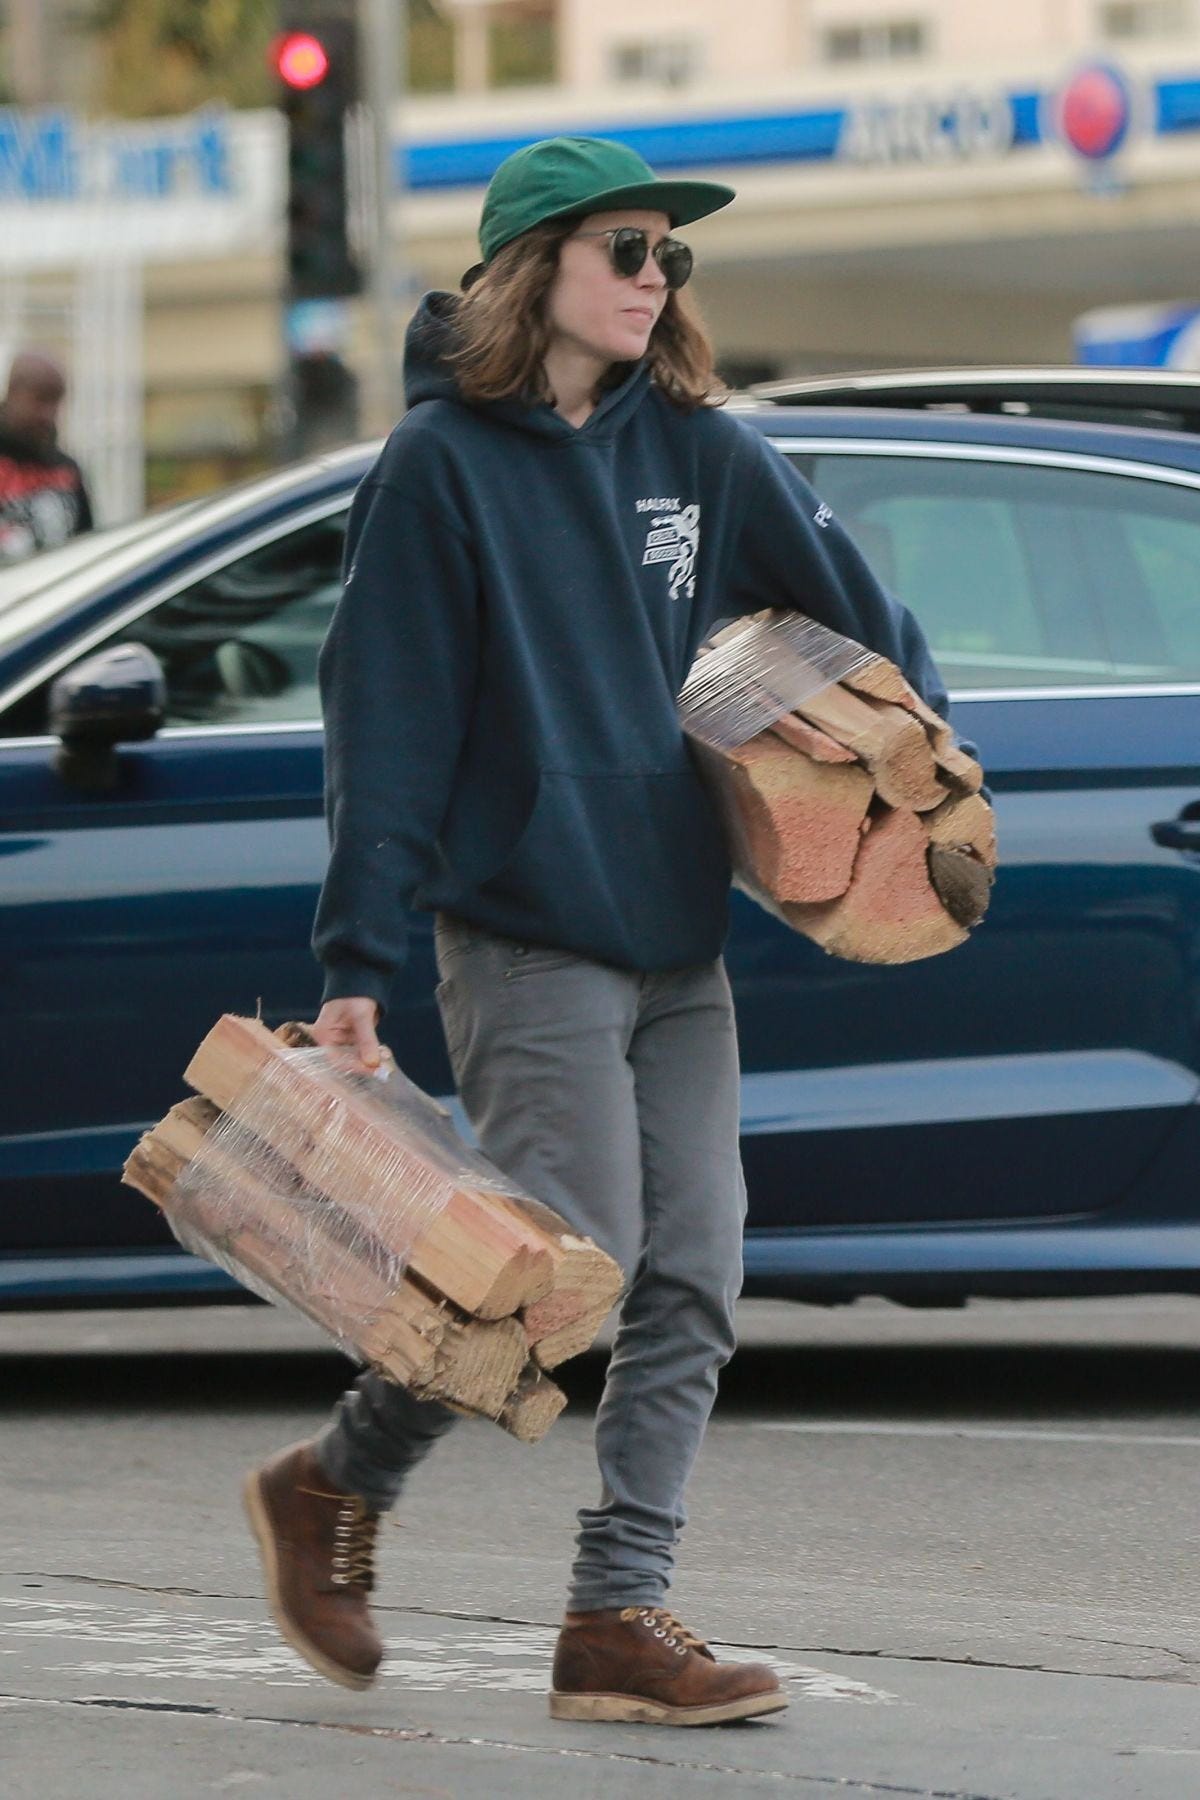 Elliot Page in a candid shot, looking unbothered and carrying two stacks of firewood in each arm